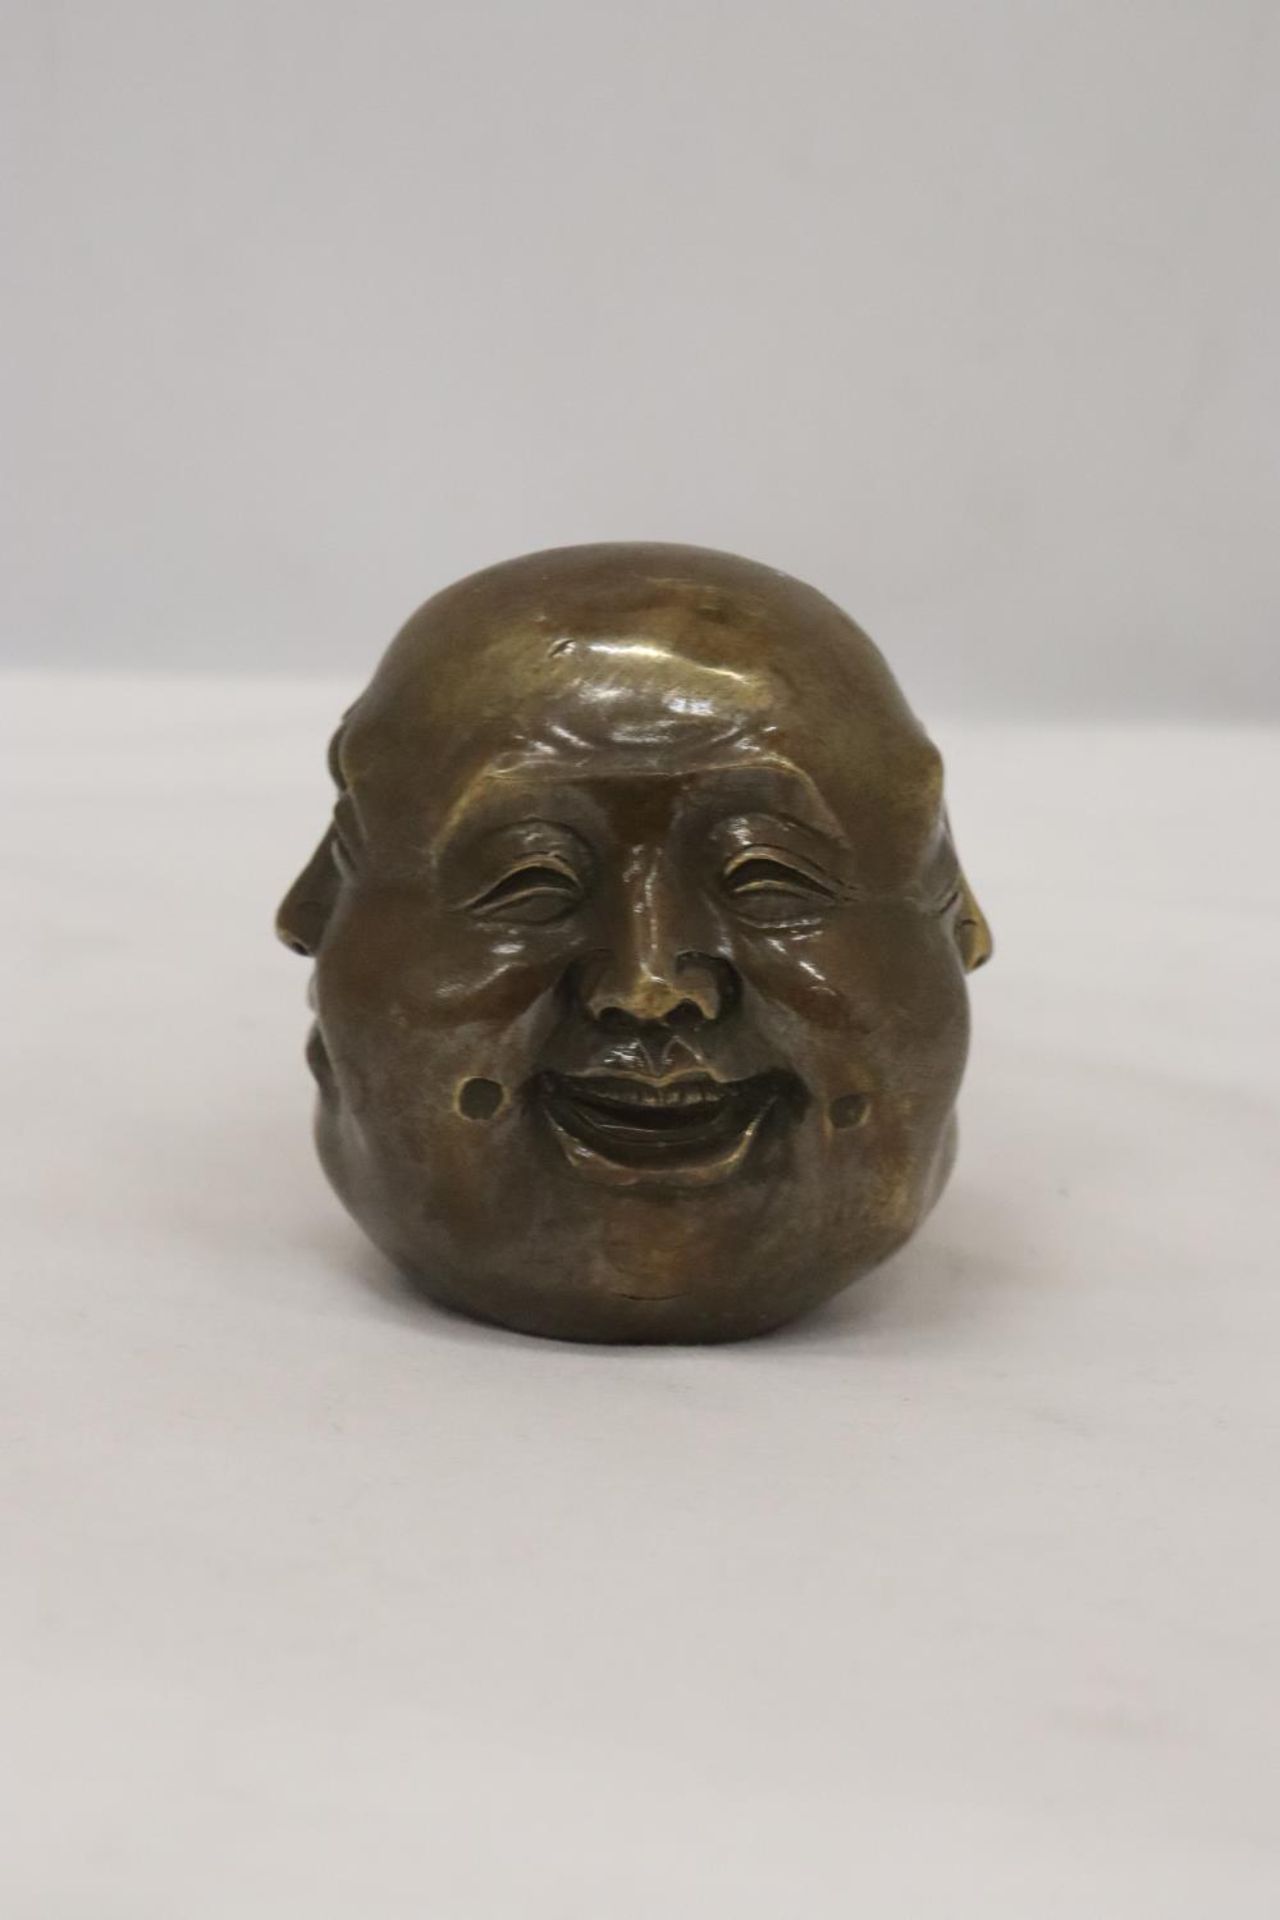 ABRONZE FOUR FACED BUDDAH, HEIGHT 8CM - Image 4 of 5